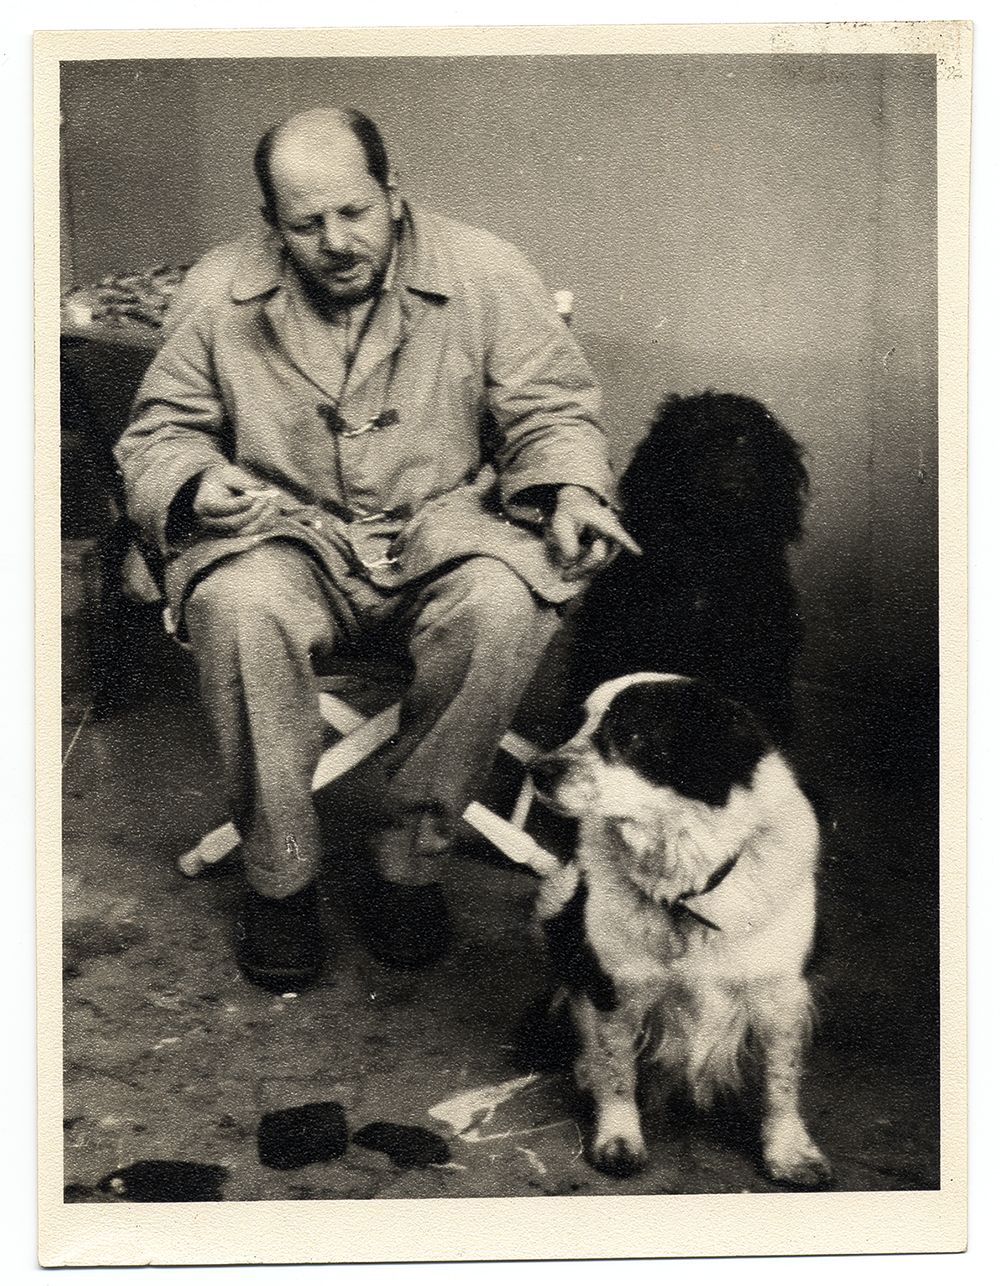 Photograph of Jackson Pollock with his pet dogs Gyp and Ahab